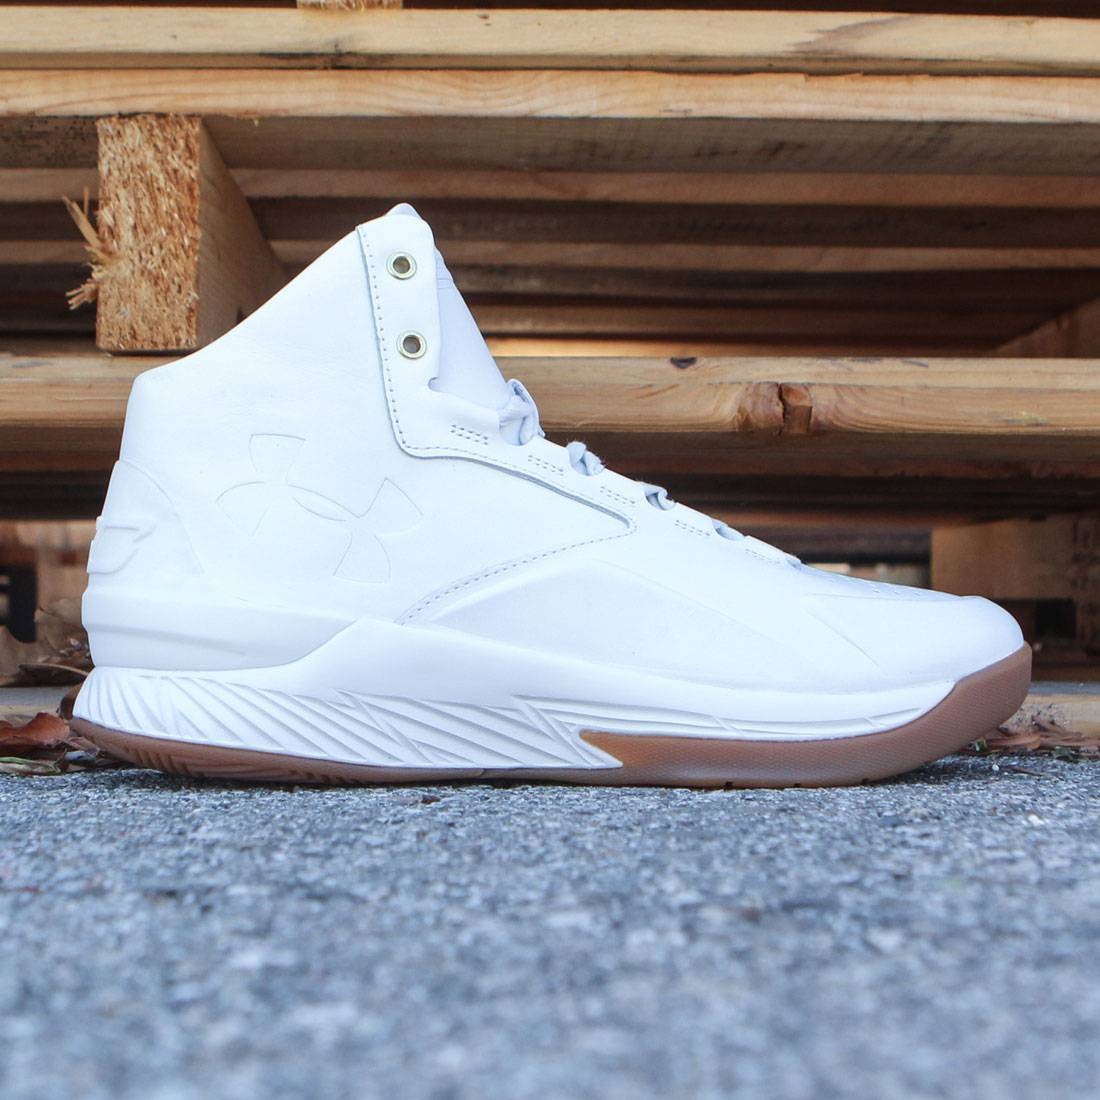 engañar estoy enfermo sostén Under Armour x Steph Curry Men Curry 1 Mid Alpha Leather - Curry Lux Pack  white stone